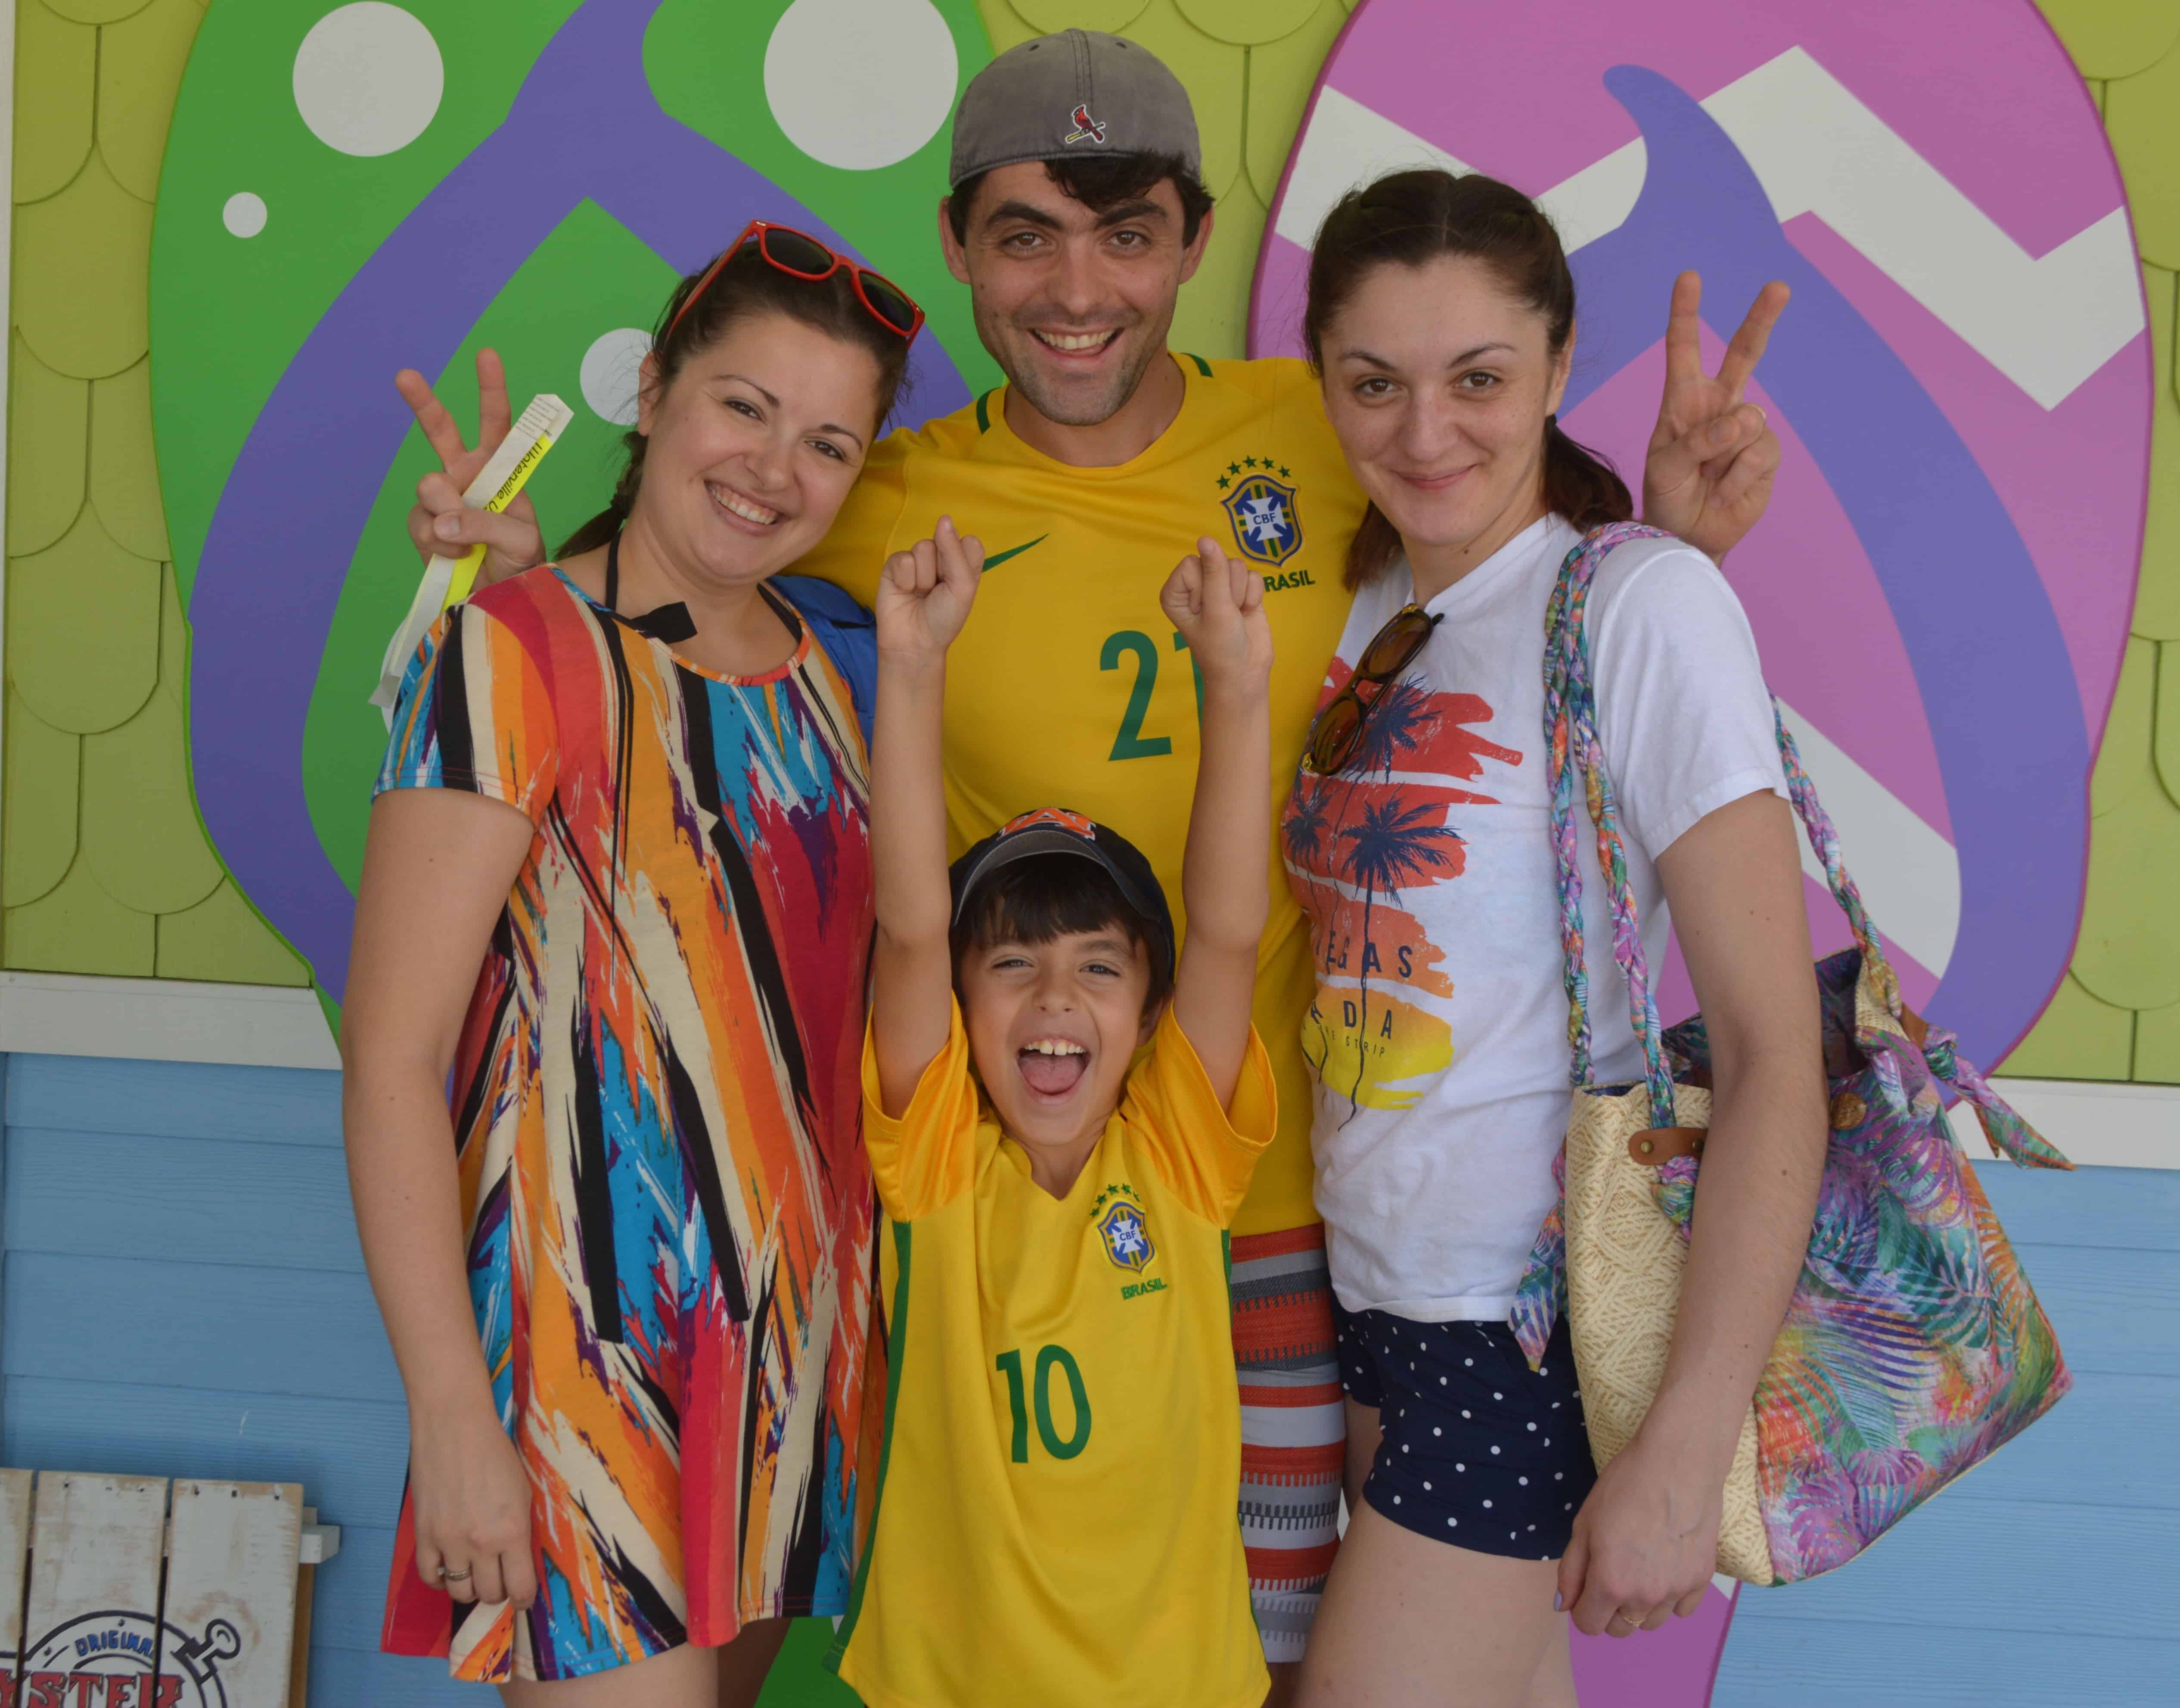 Anatolie Simion poses with his family